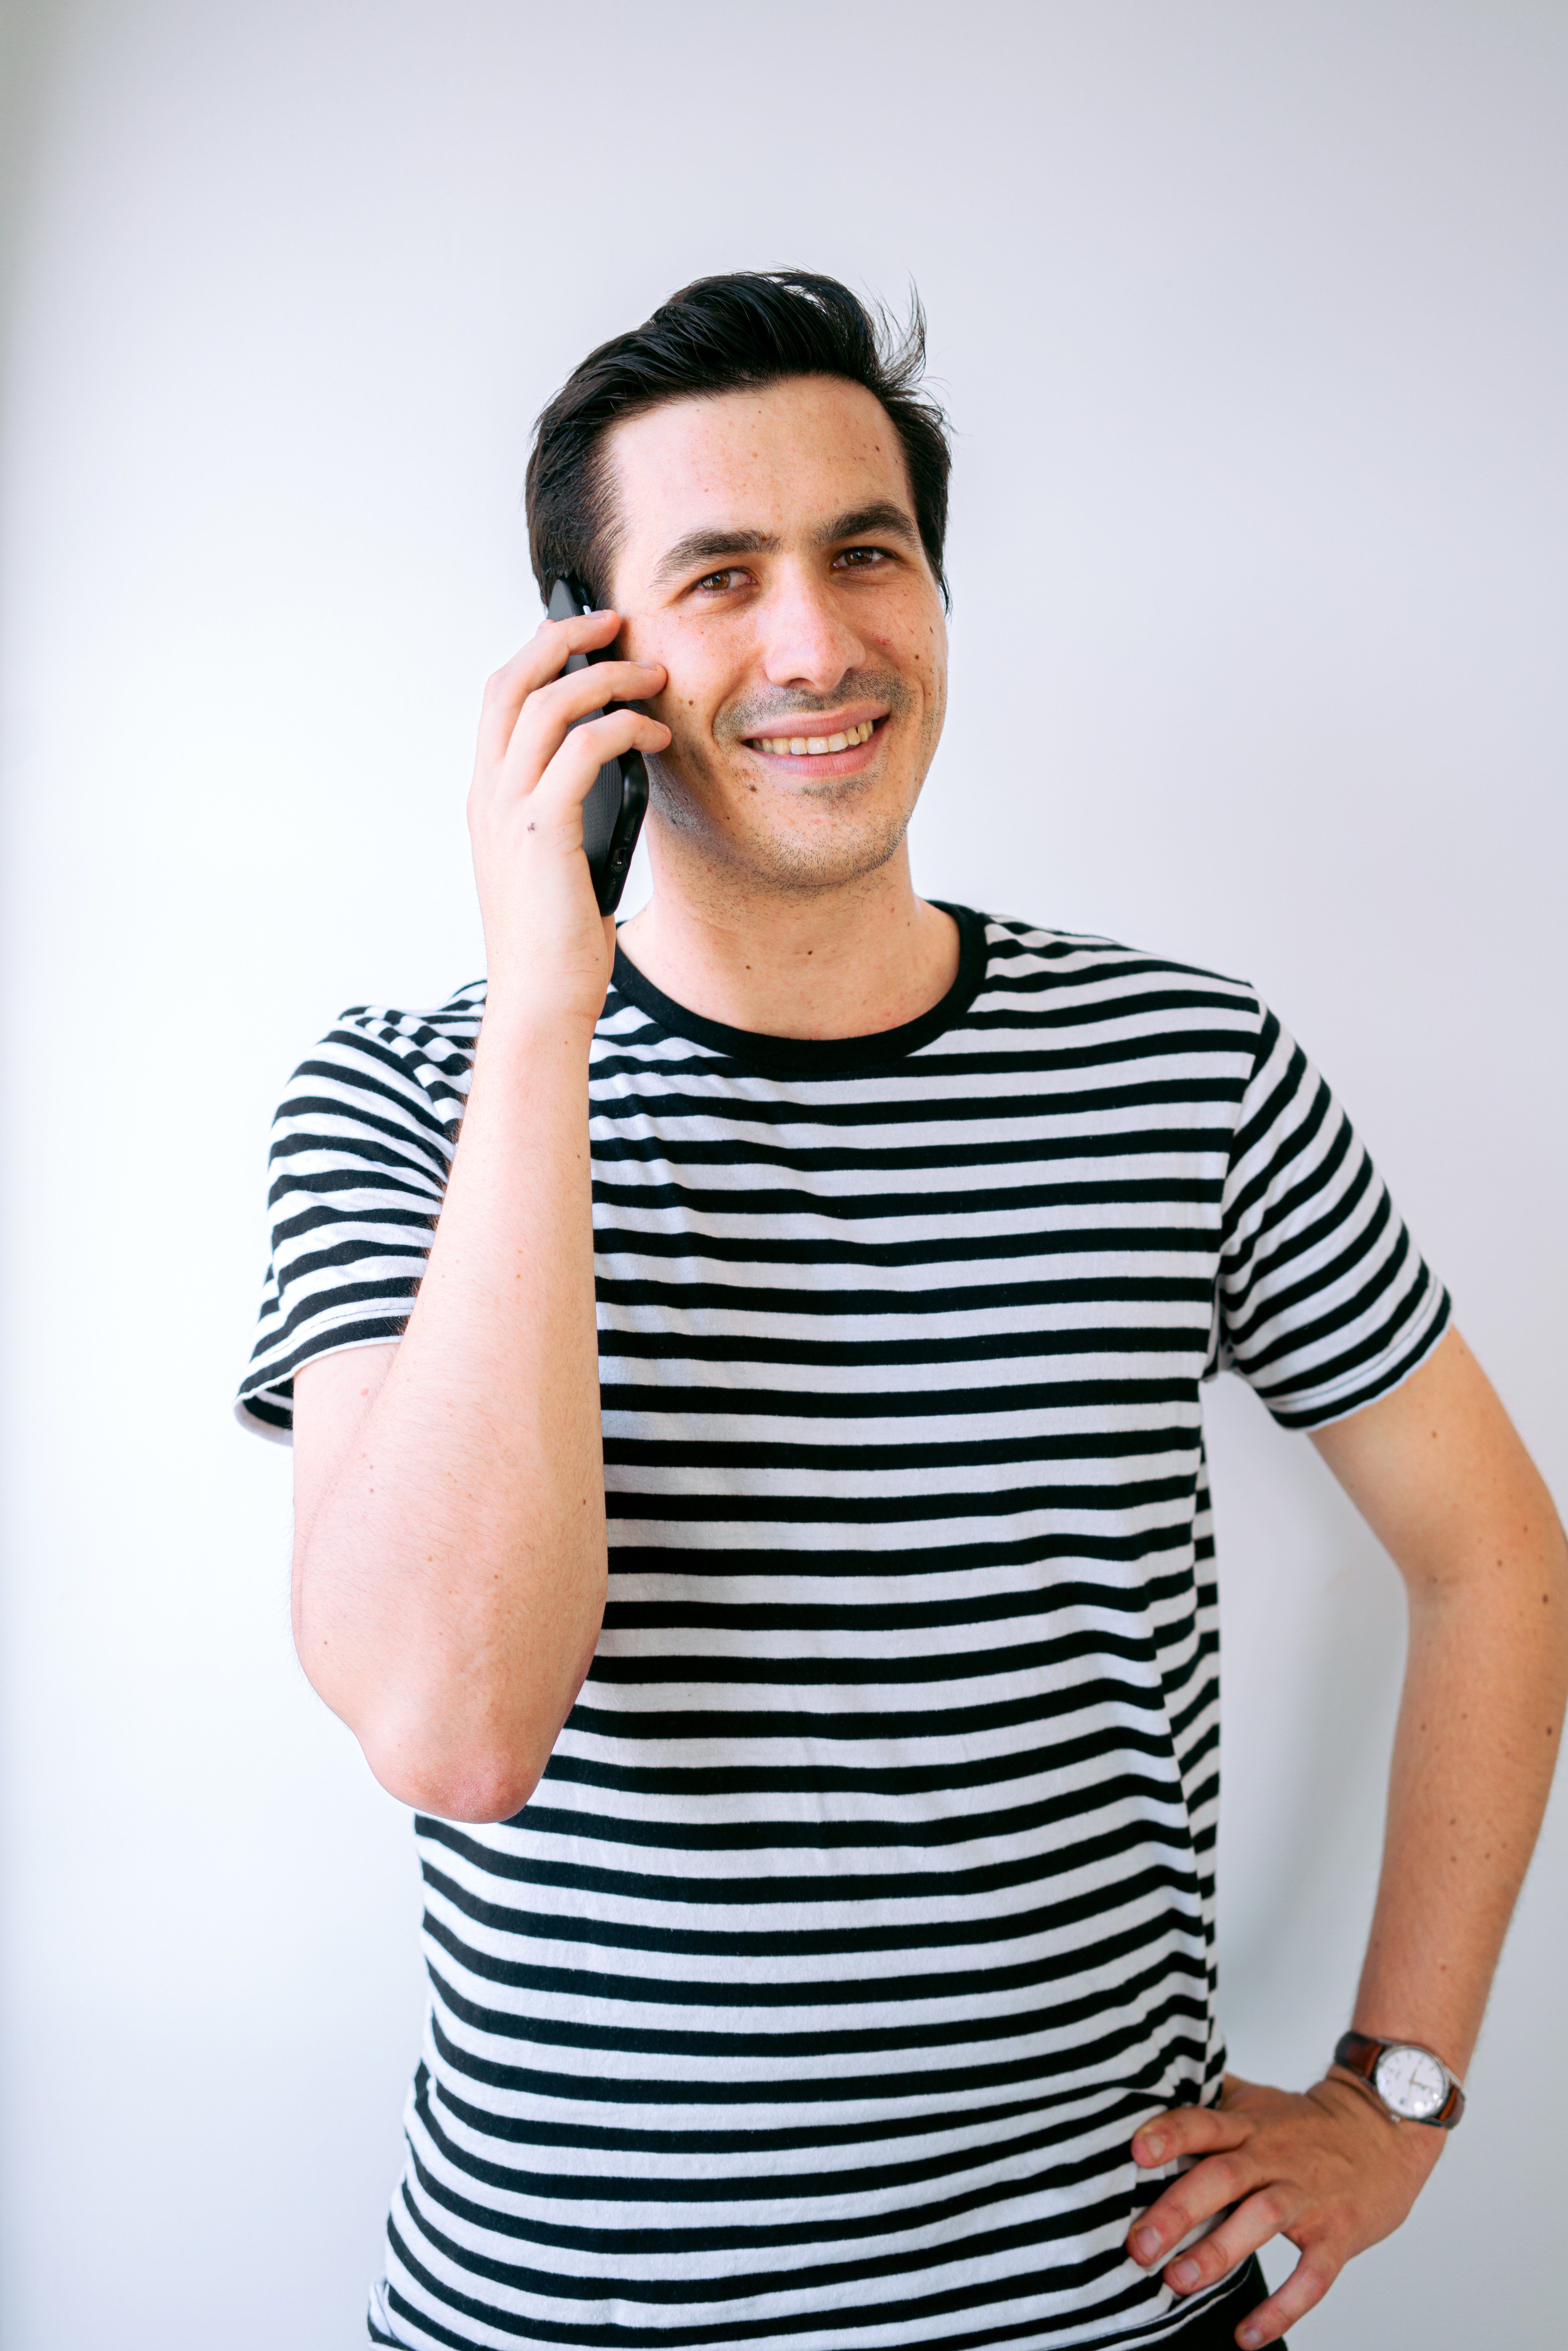 Smiling man on the phone | Photo: Pexels